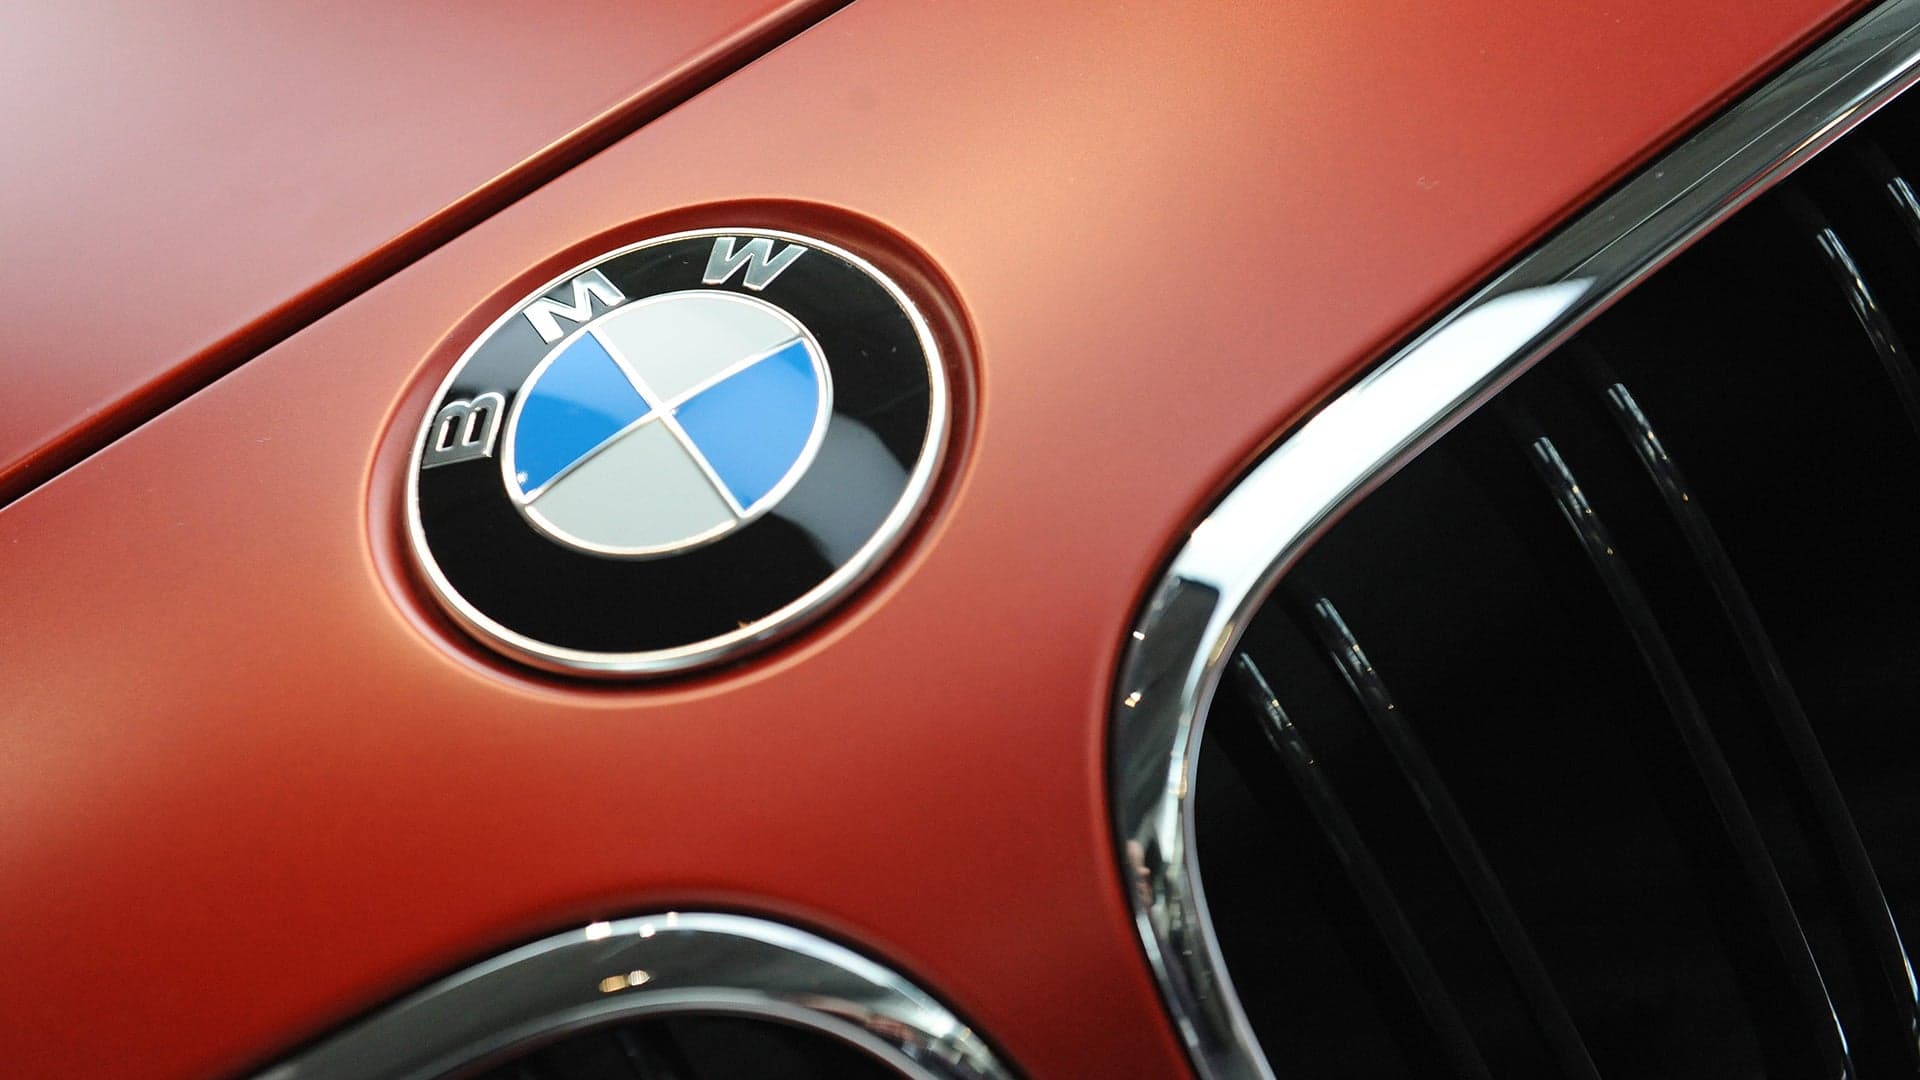 BMW Announces Sweeping Recall of 1 Million Cars Over Risk of Random Fires While Parked